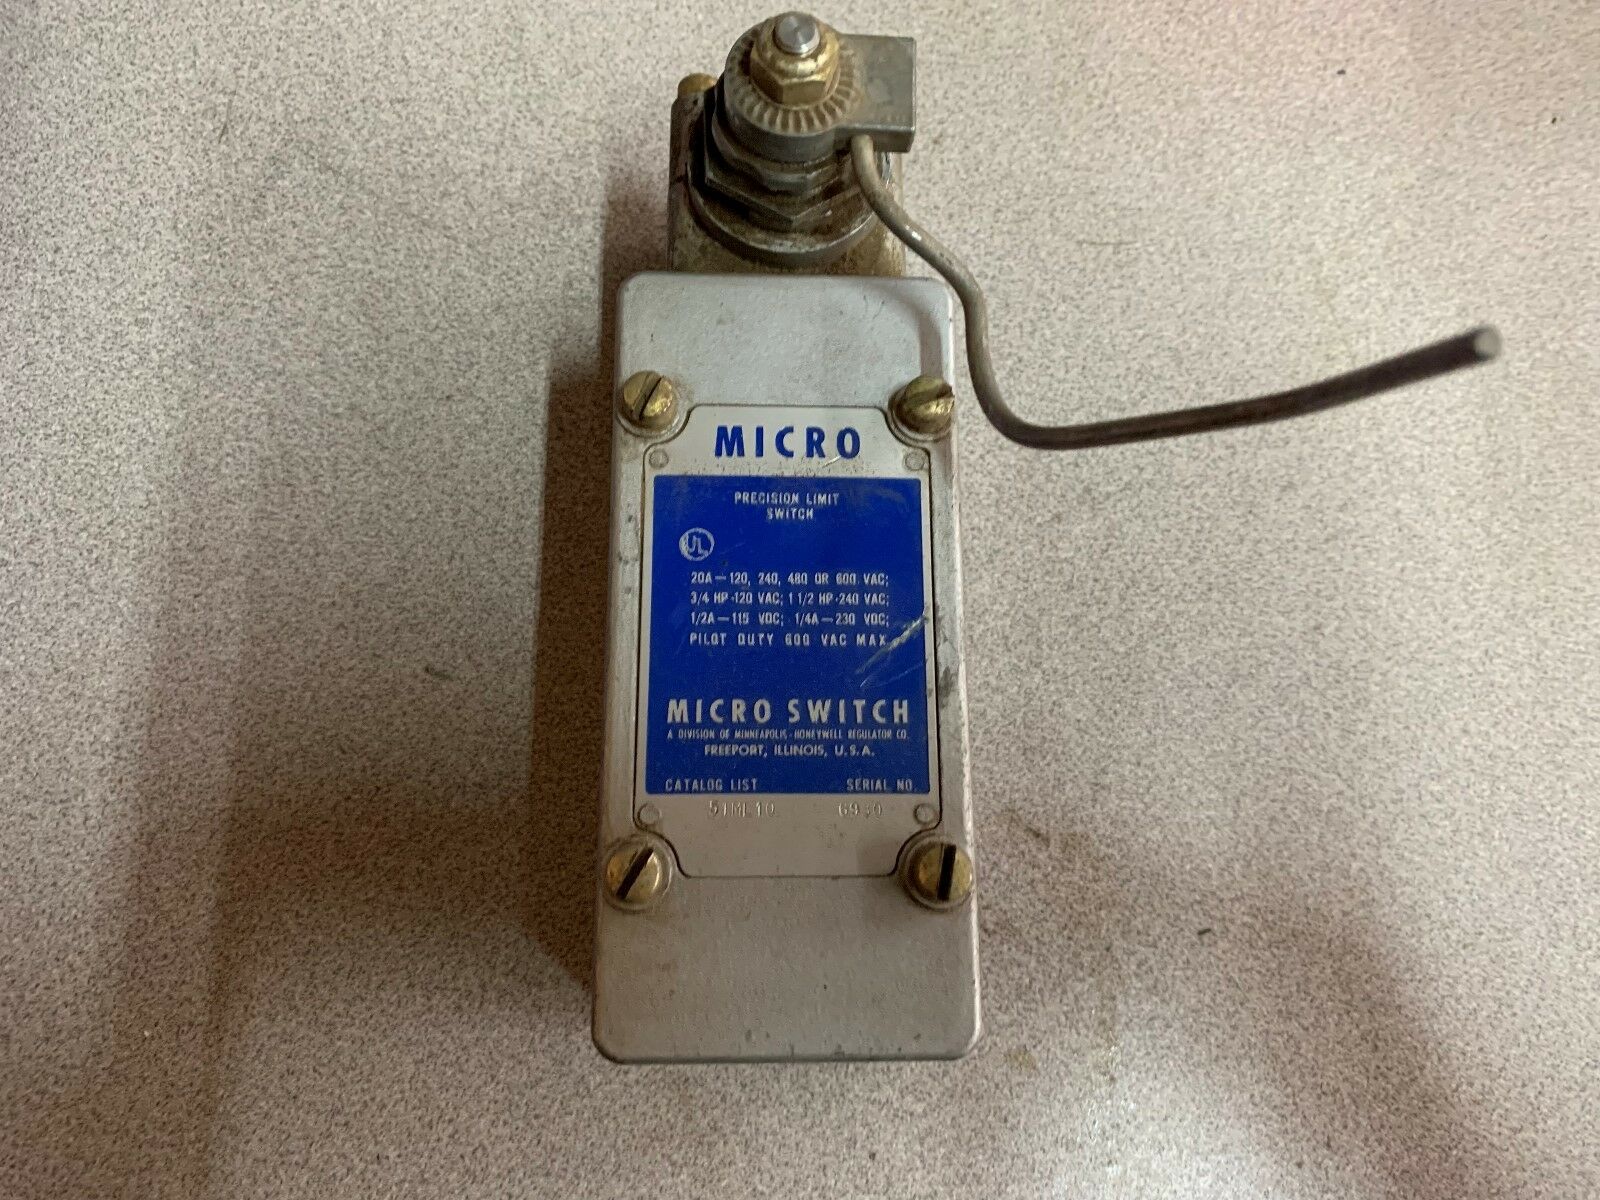 USED MICRO SWITCH 51ML10